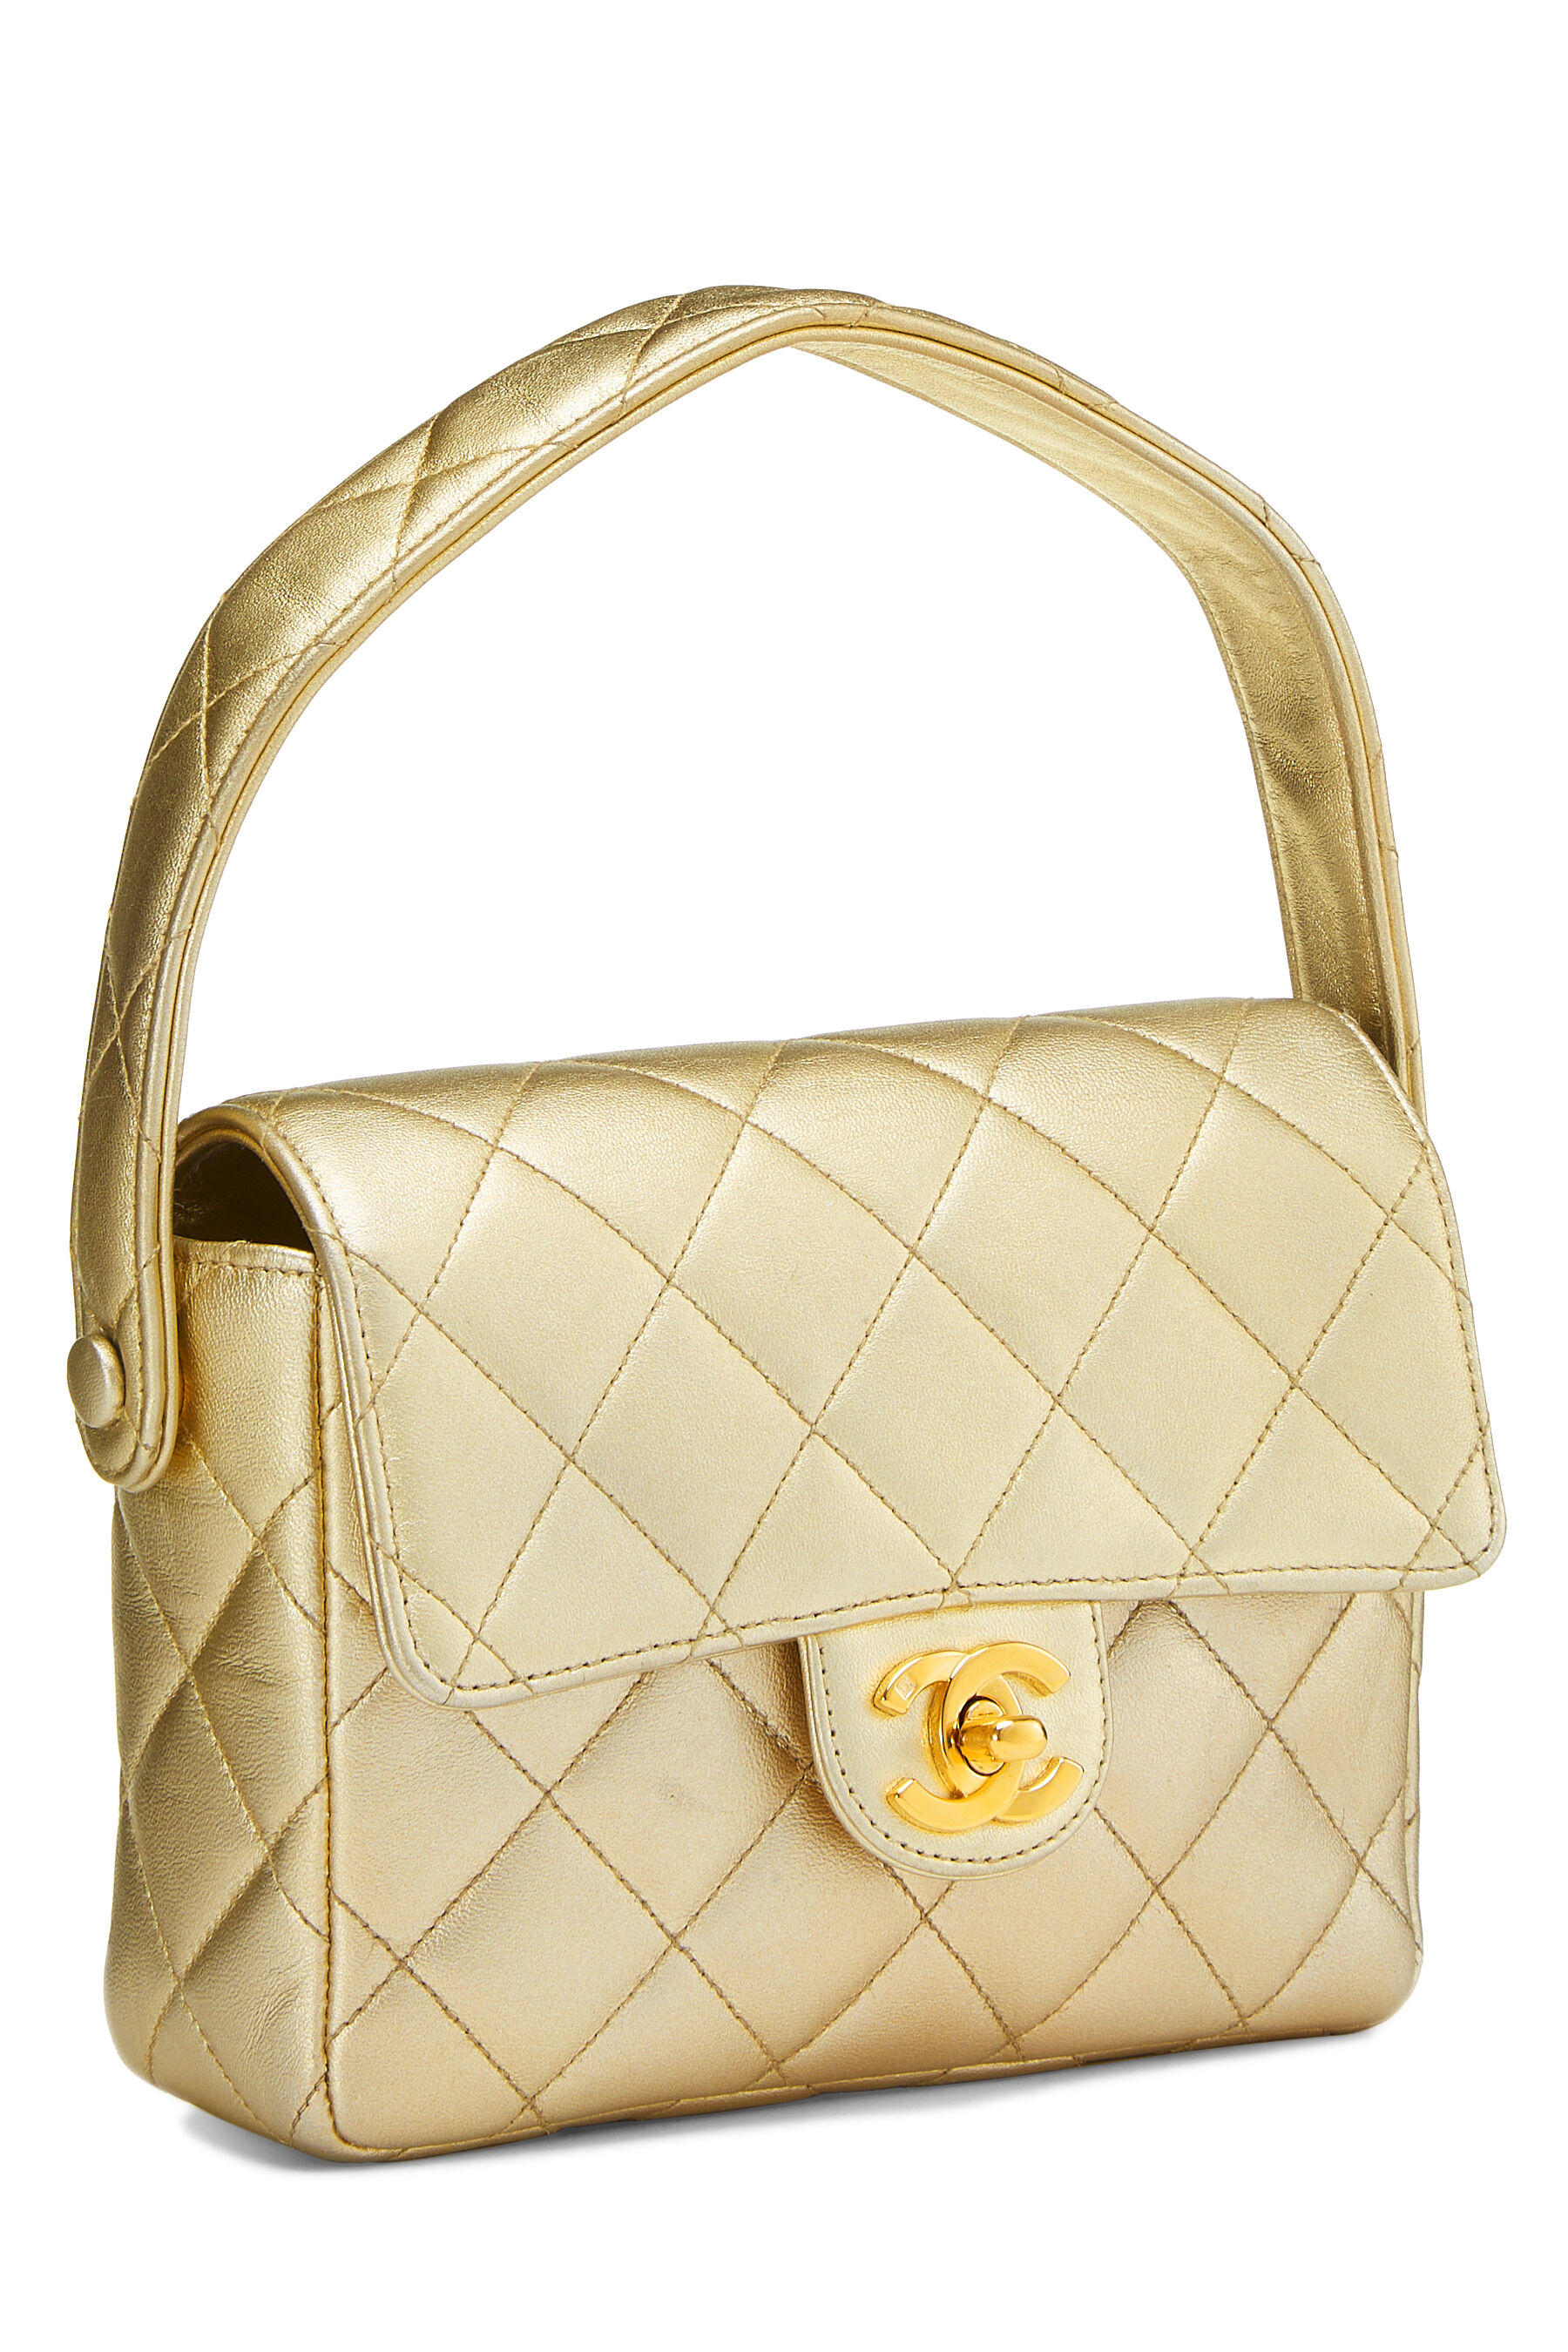 Chanel Vintage Pink Quilted Caviar Top Handle Kelly Flap Bag Gold